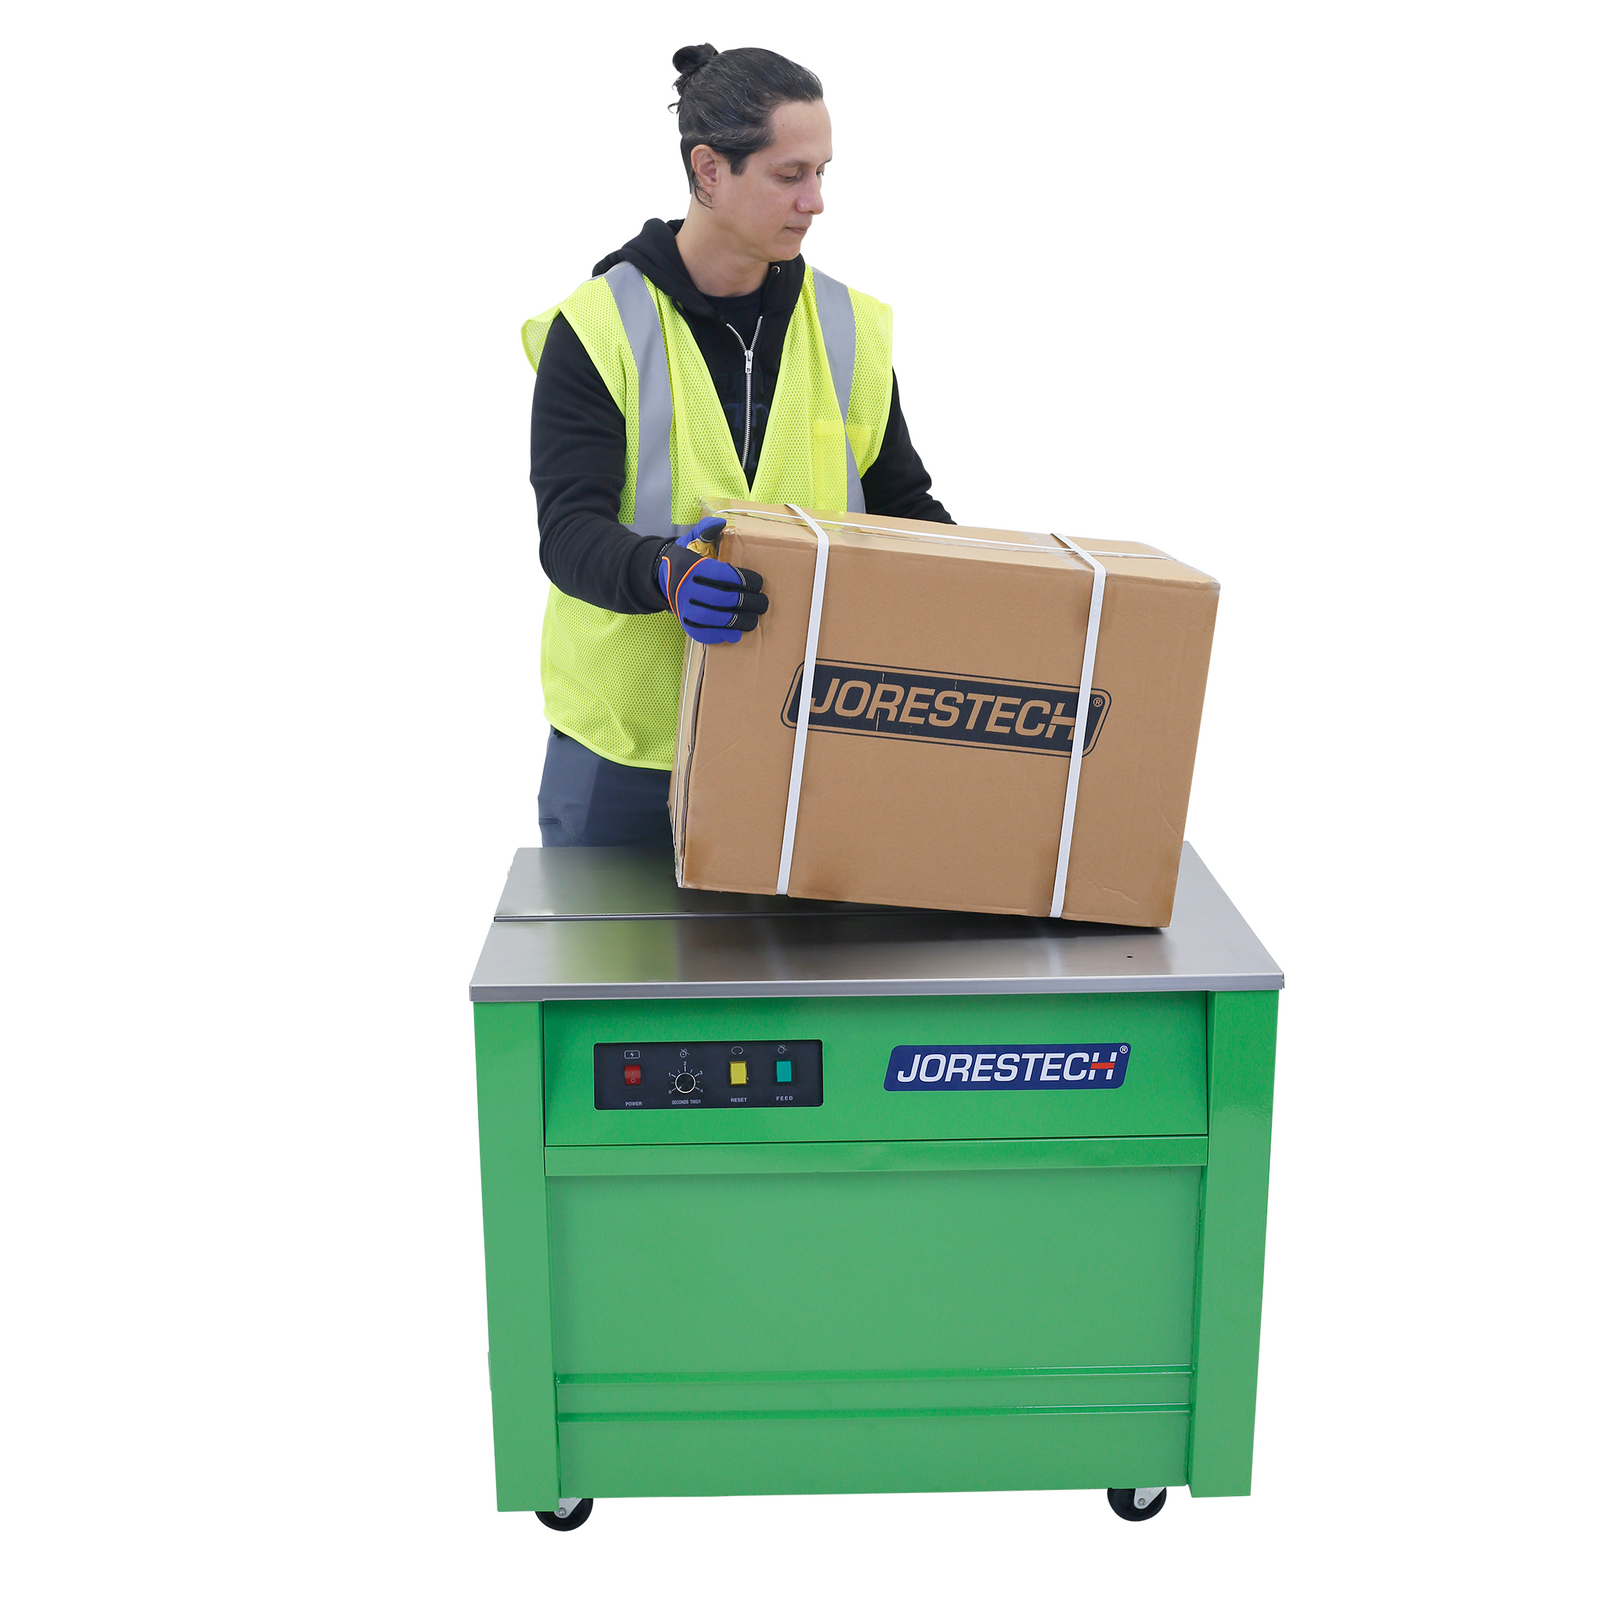 Worker operating a green JORES TECHNOLOGIES® semi automatic poly strapping machine with wheels. He has a carton box positioned on top of the machine with 3 poly straps securing the box around